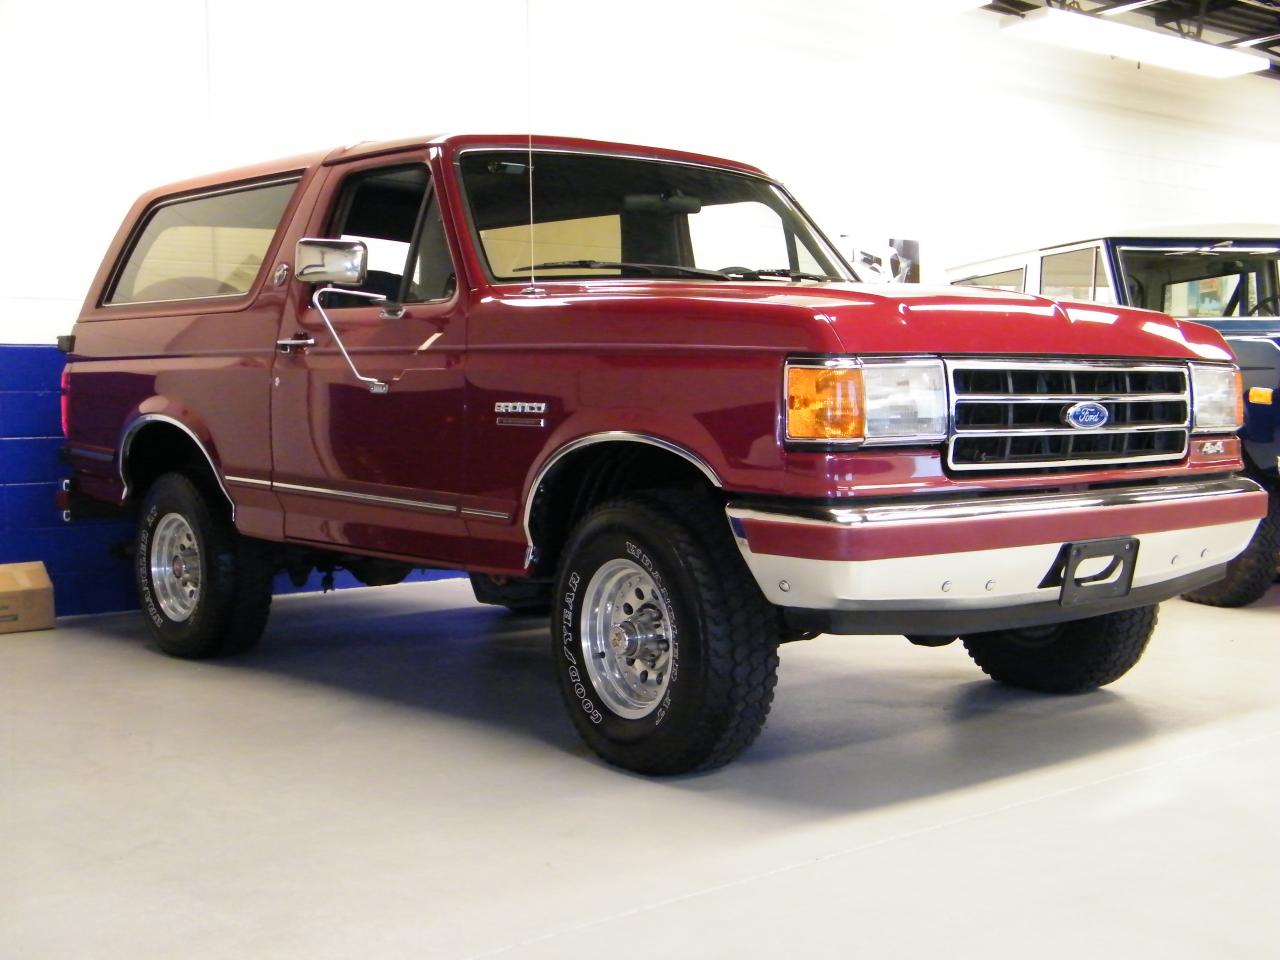 1990 Ford Bricknose Bronco red